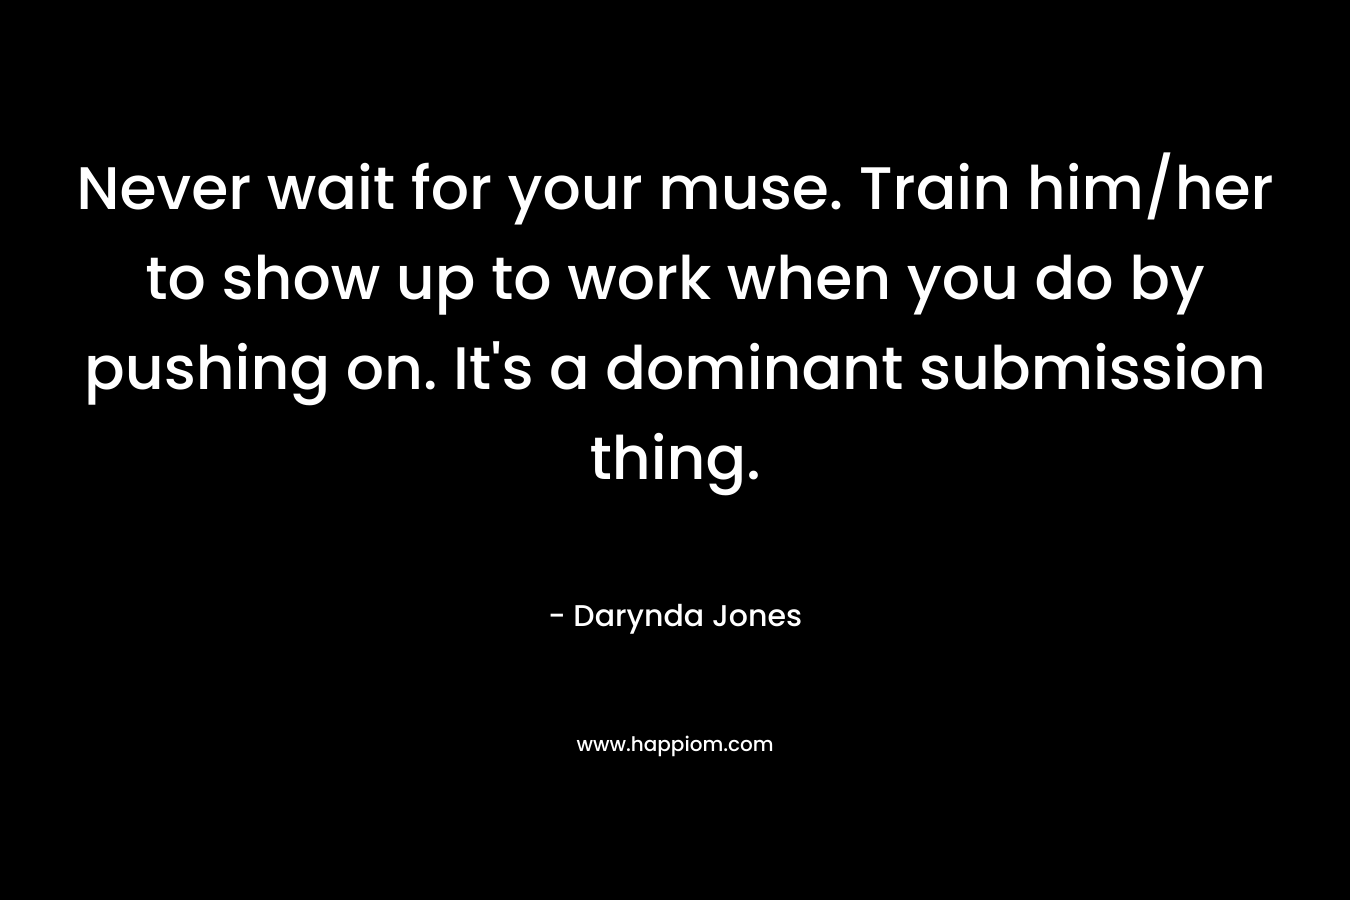 Never wait for your muse. Train him/her to show up to work when you do by pushing on. It's a dominant submission thing.